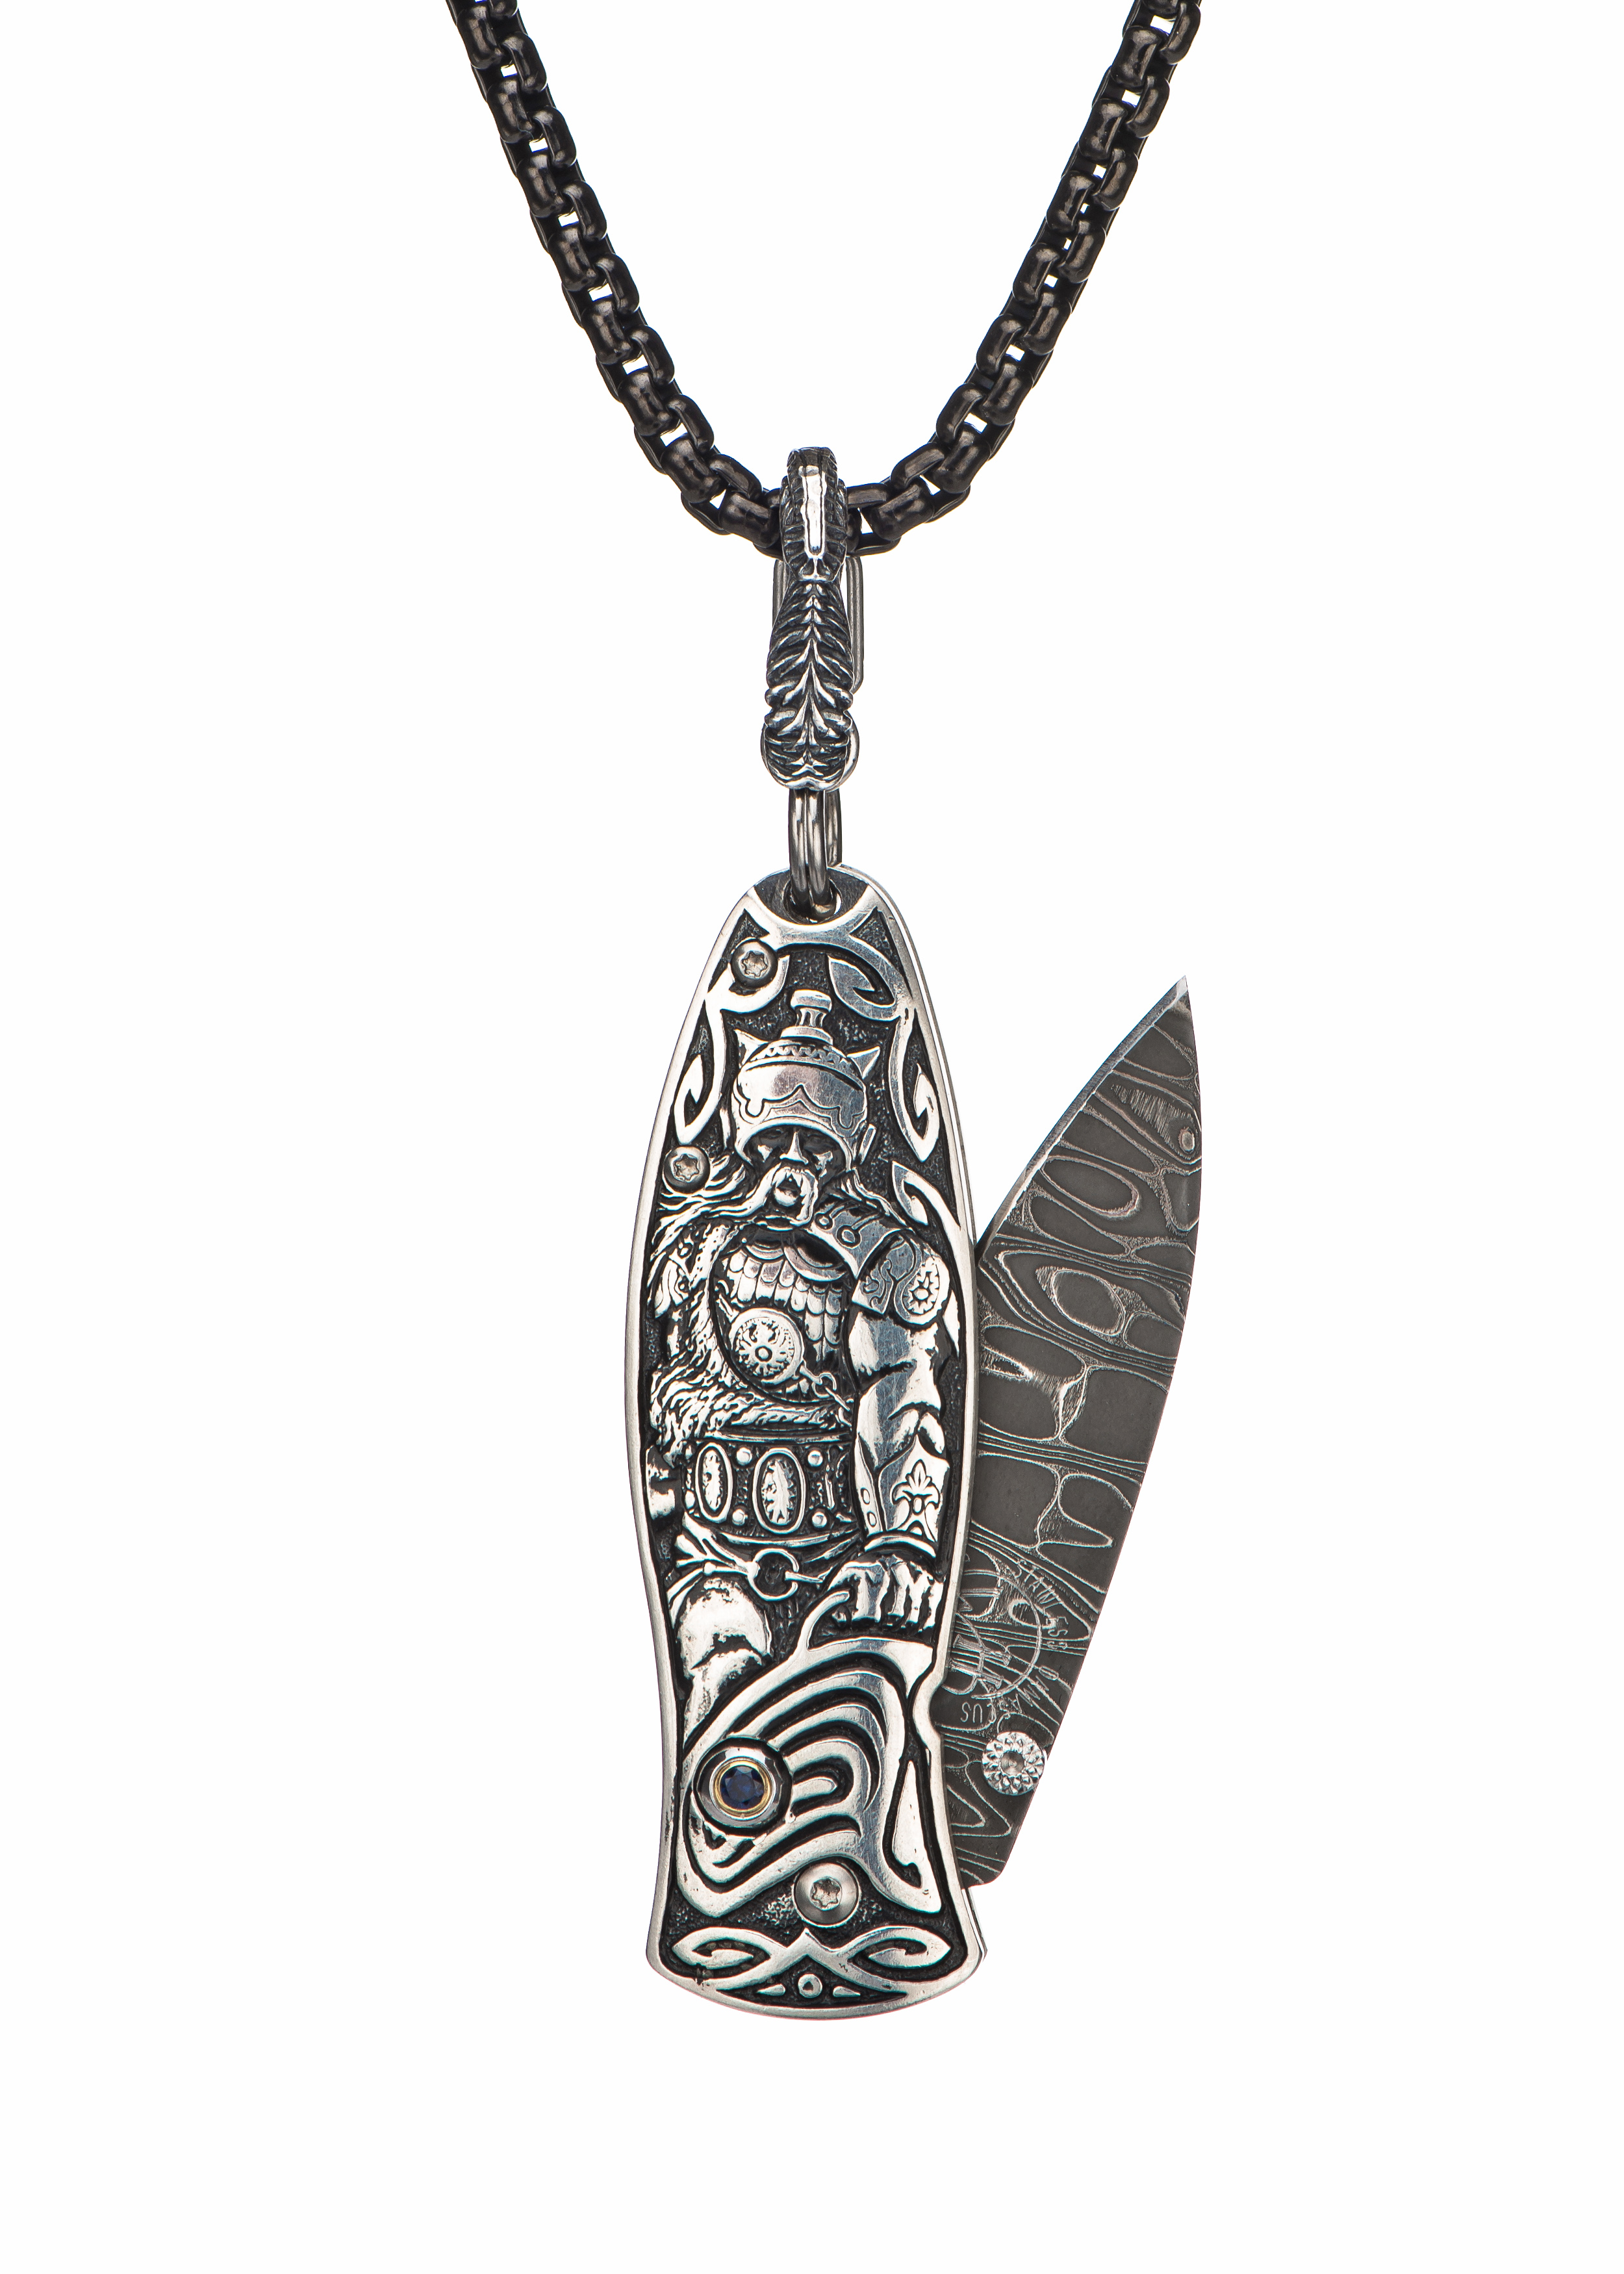 Sculpted knife pendant with damascus blade